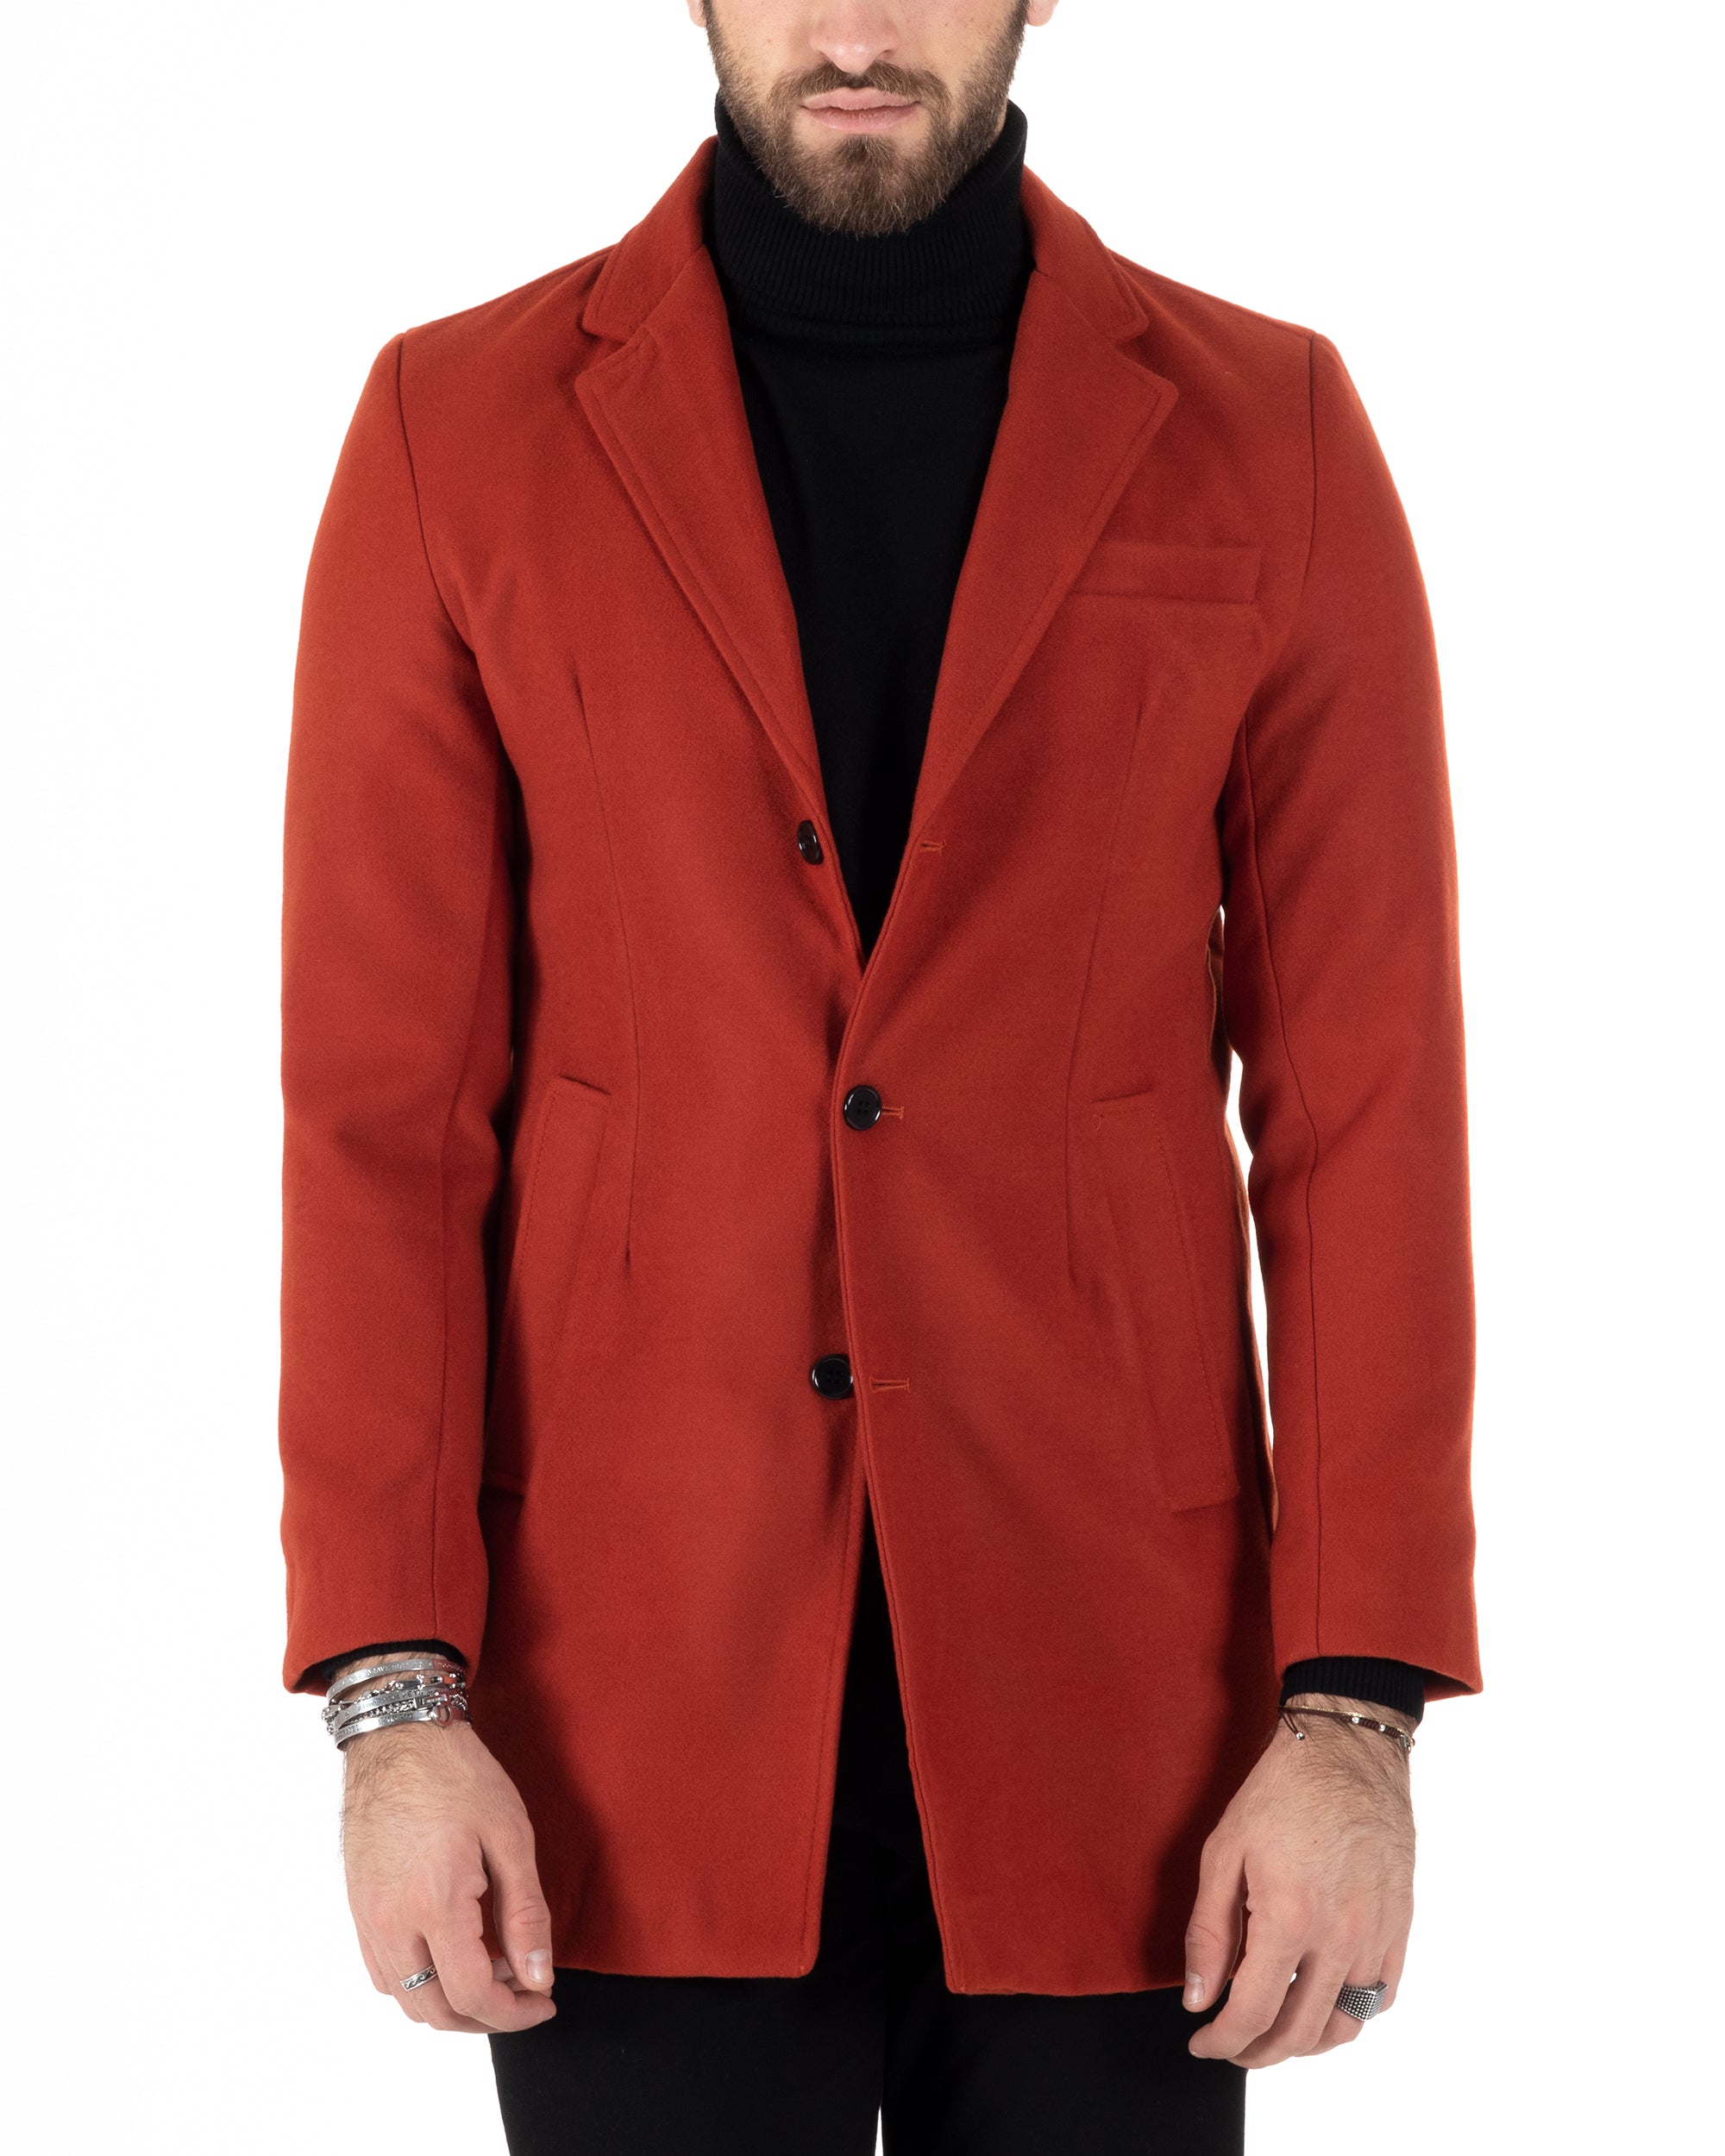 Single-breasted Coat Men's Jacket Reverse Collar Elegant Baronet Red Solid Color Jacket GIOSAL-G2685A